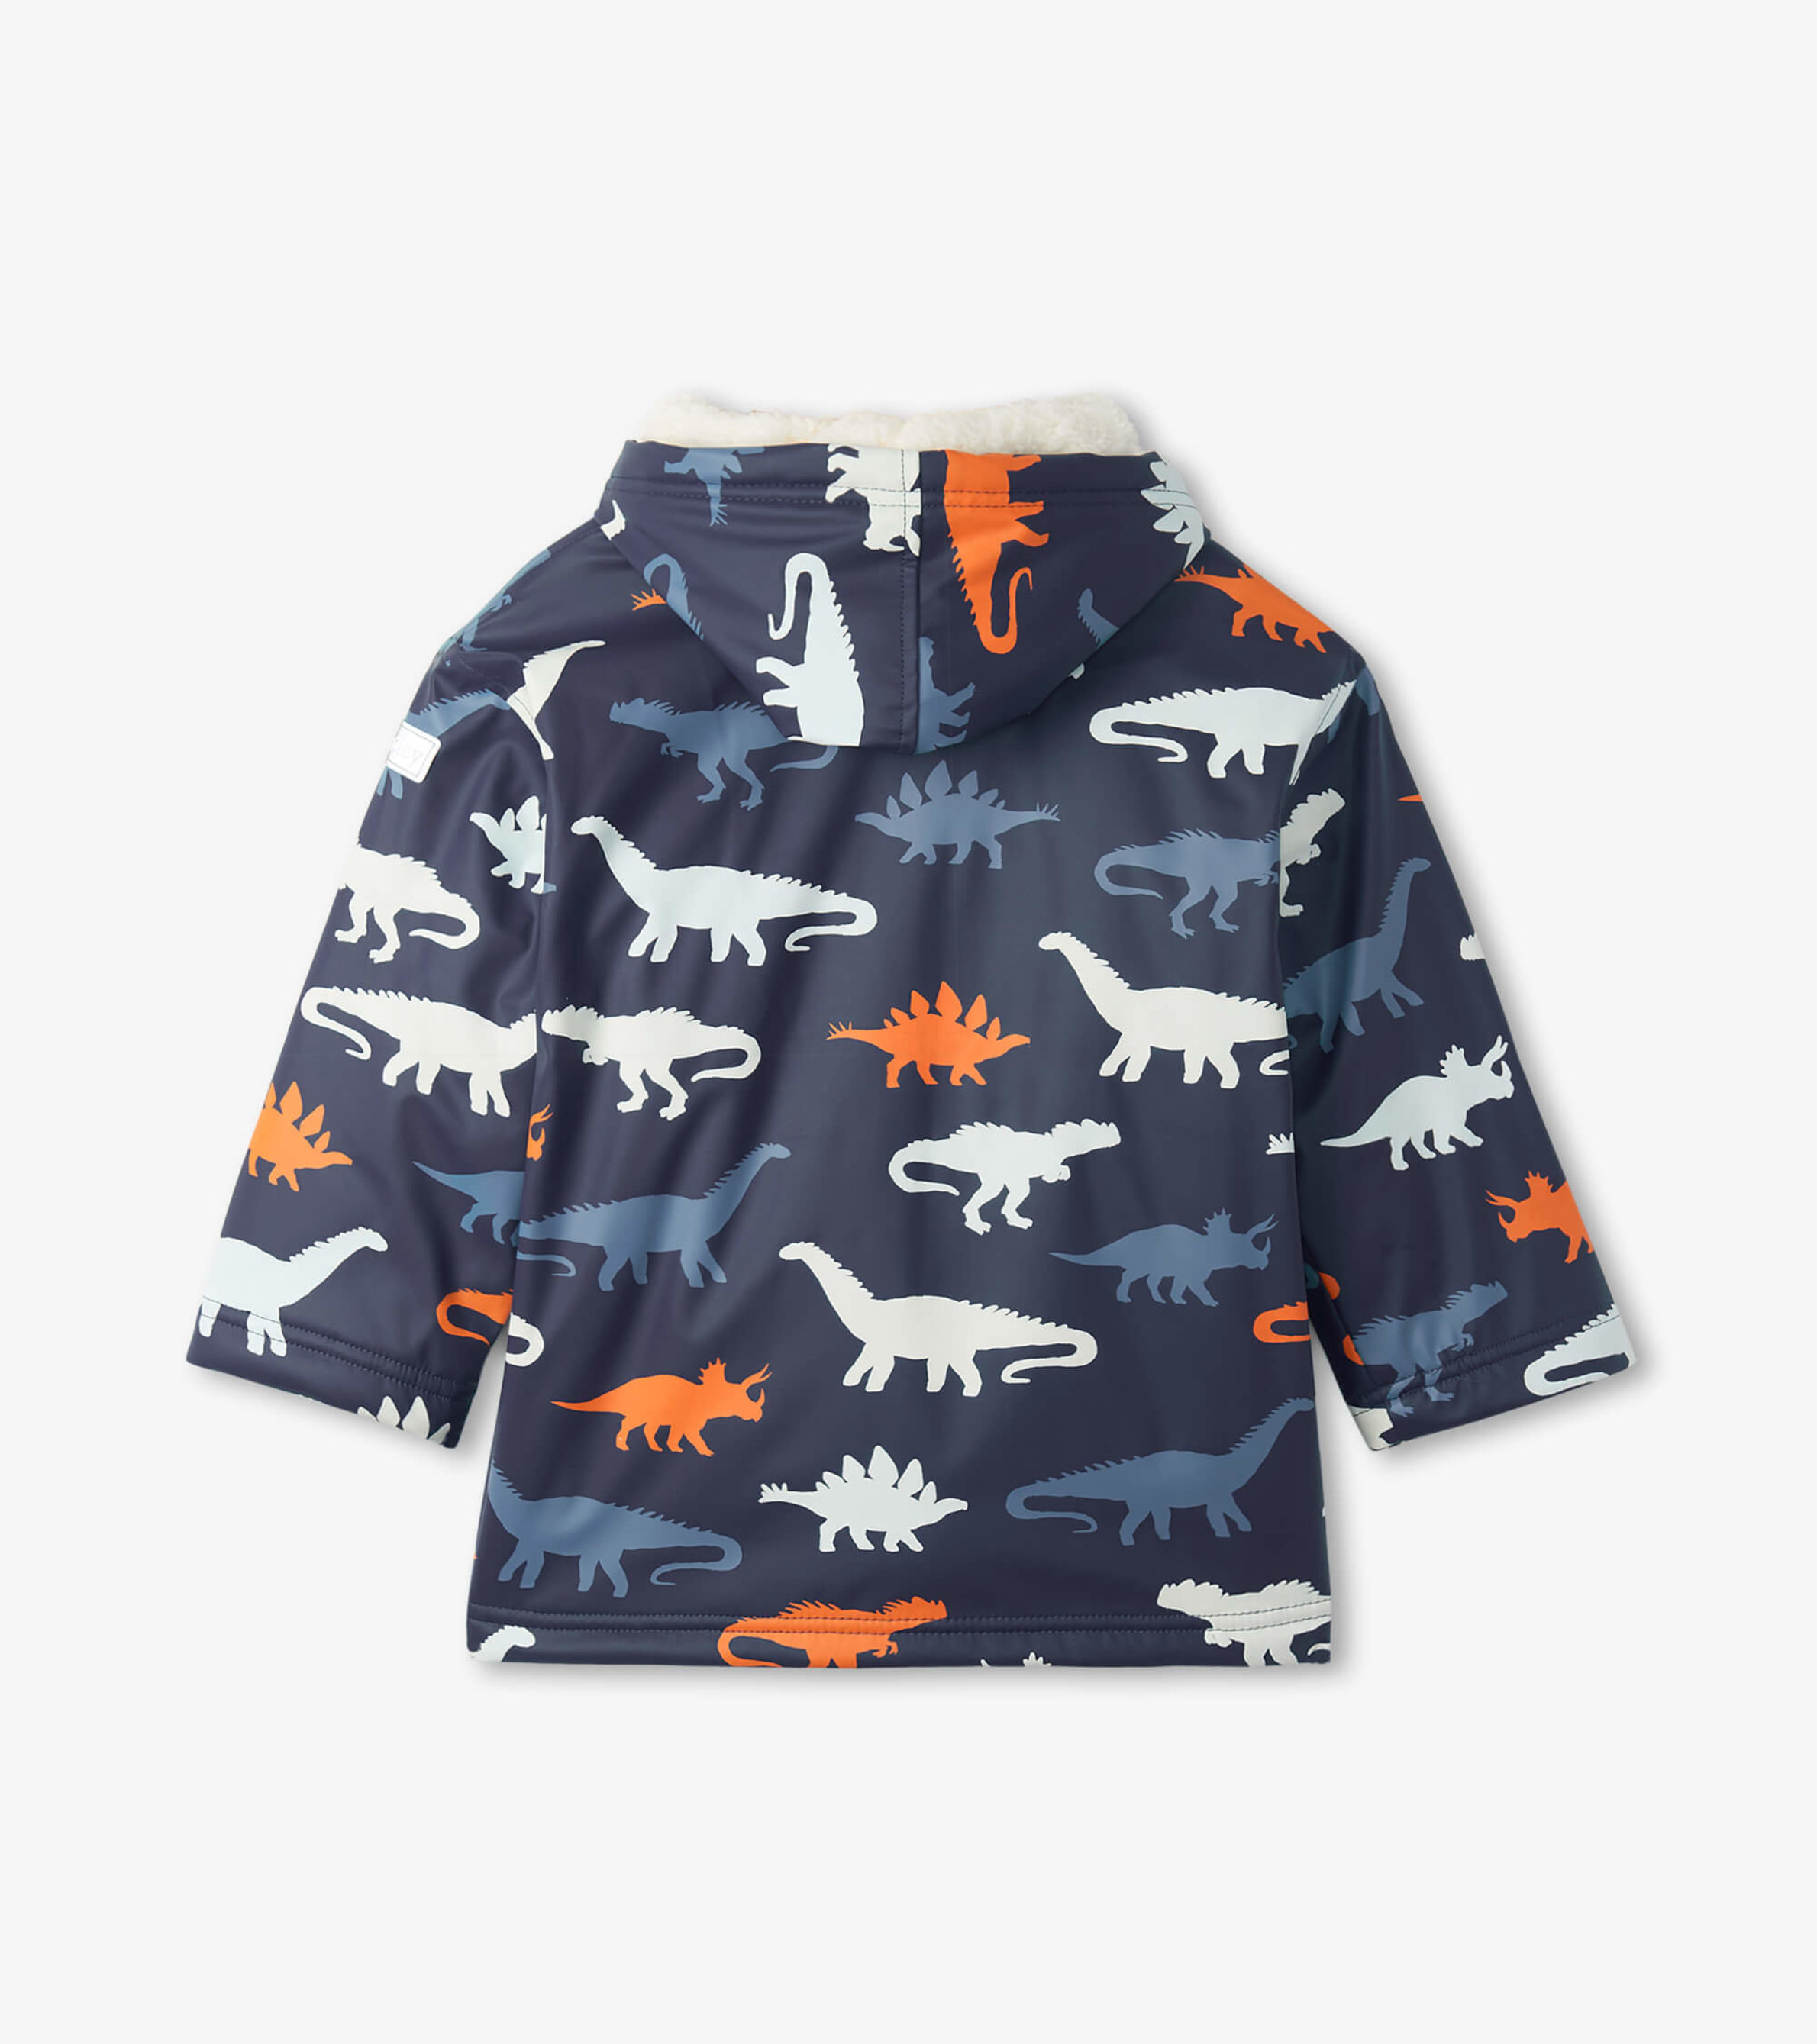 https://cdn.hatley.com/product_images/dino-silhouettes-colour-changing-raincoat/F22DSK818_B_jpg/pdp_zoom.jpg?c=1692028651&locale=us_en